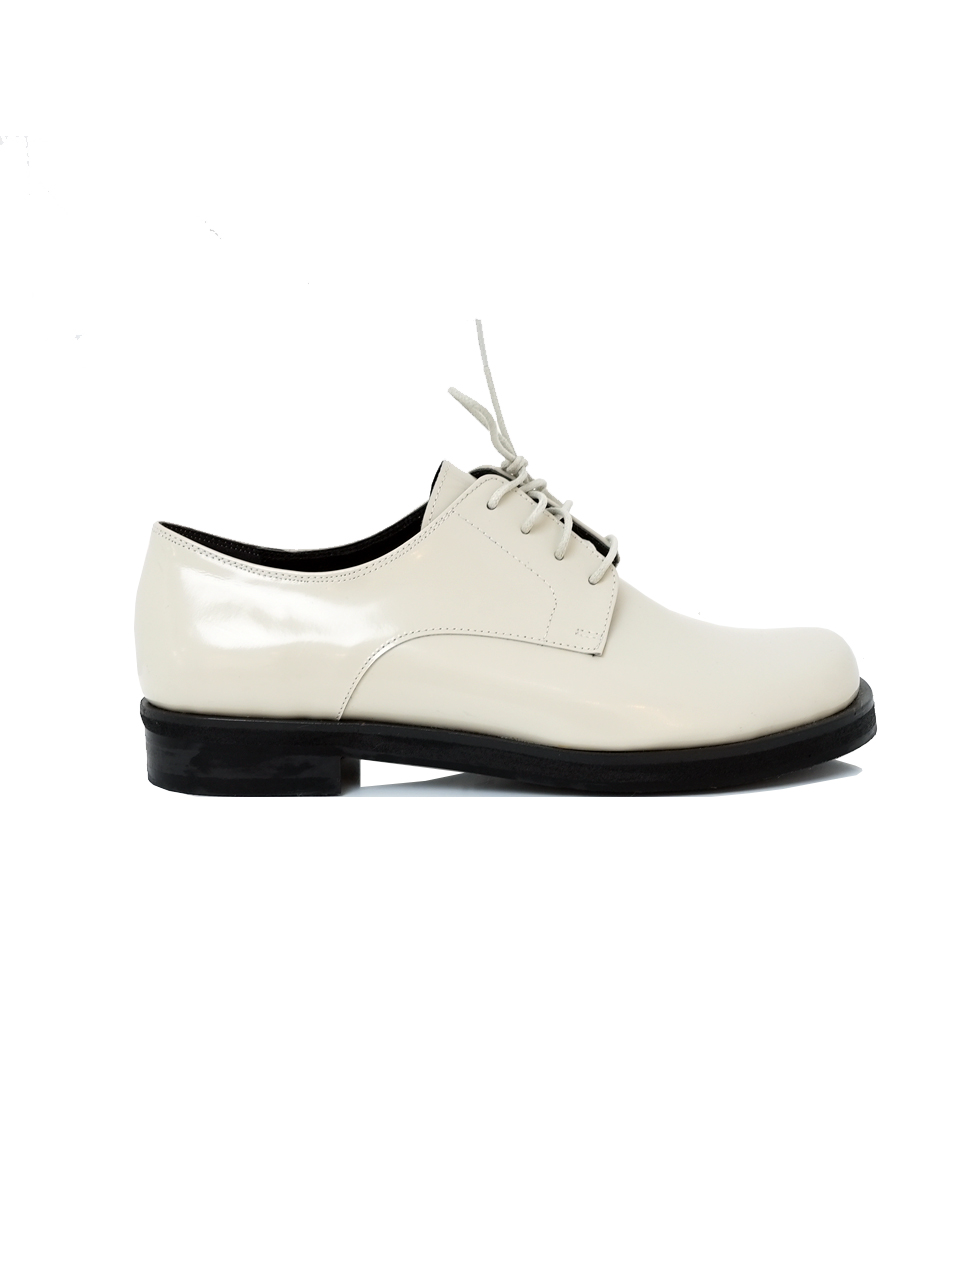 PEARL DERBY SHOES-cream